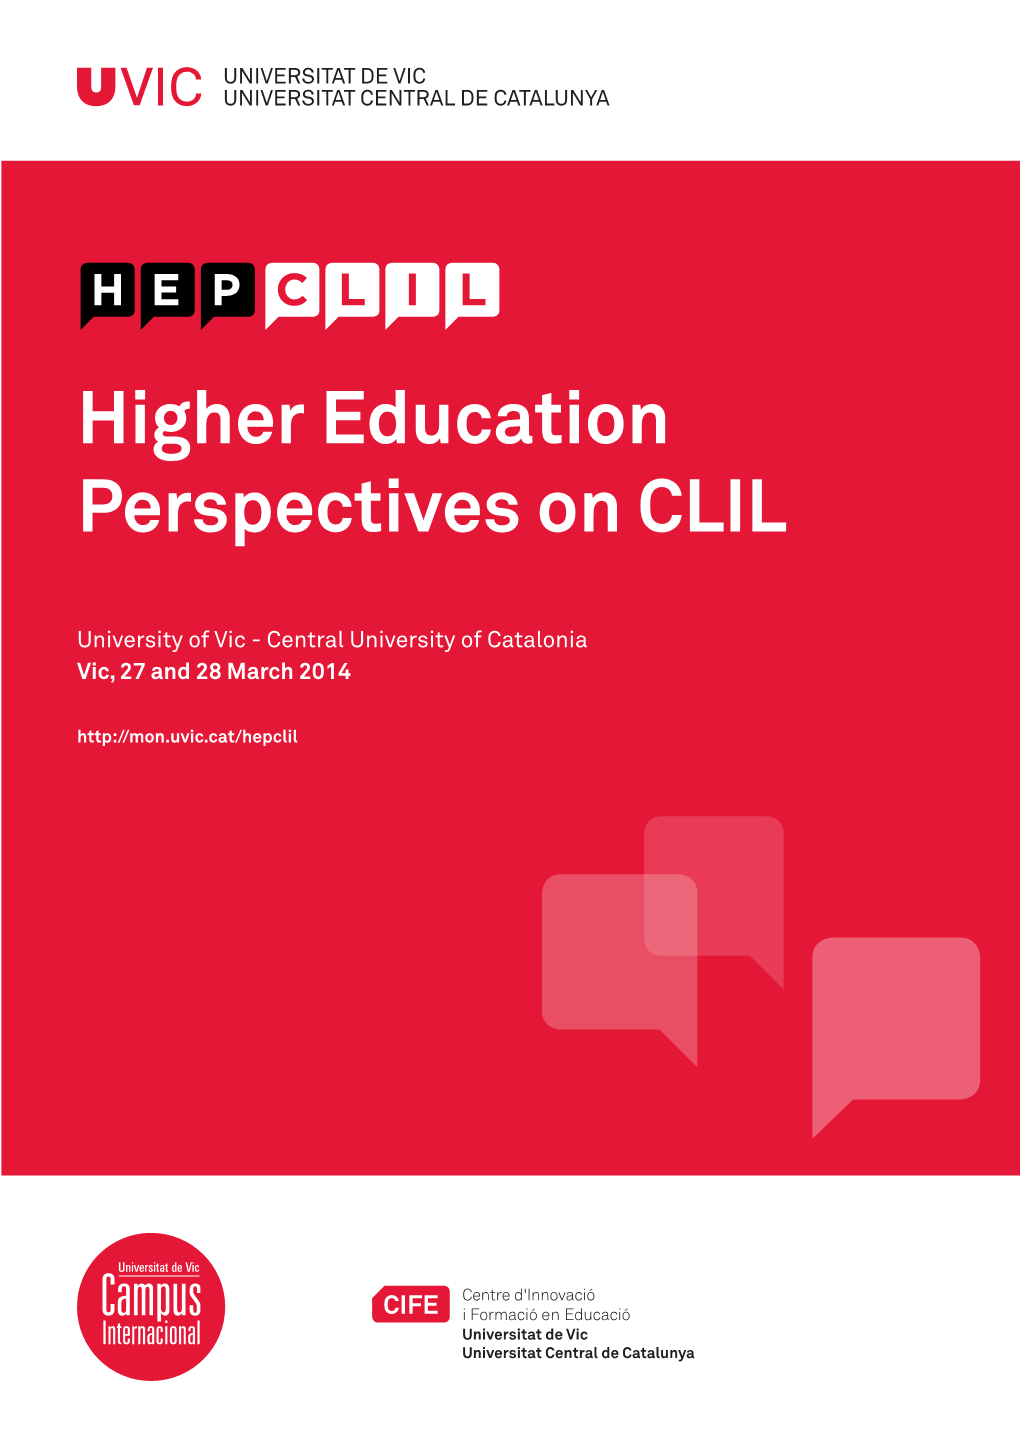 Higher Education Perspectives on CLIL